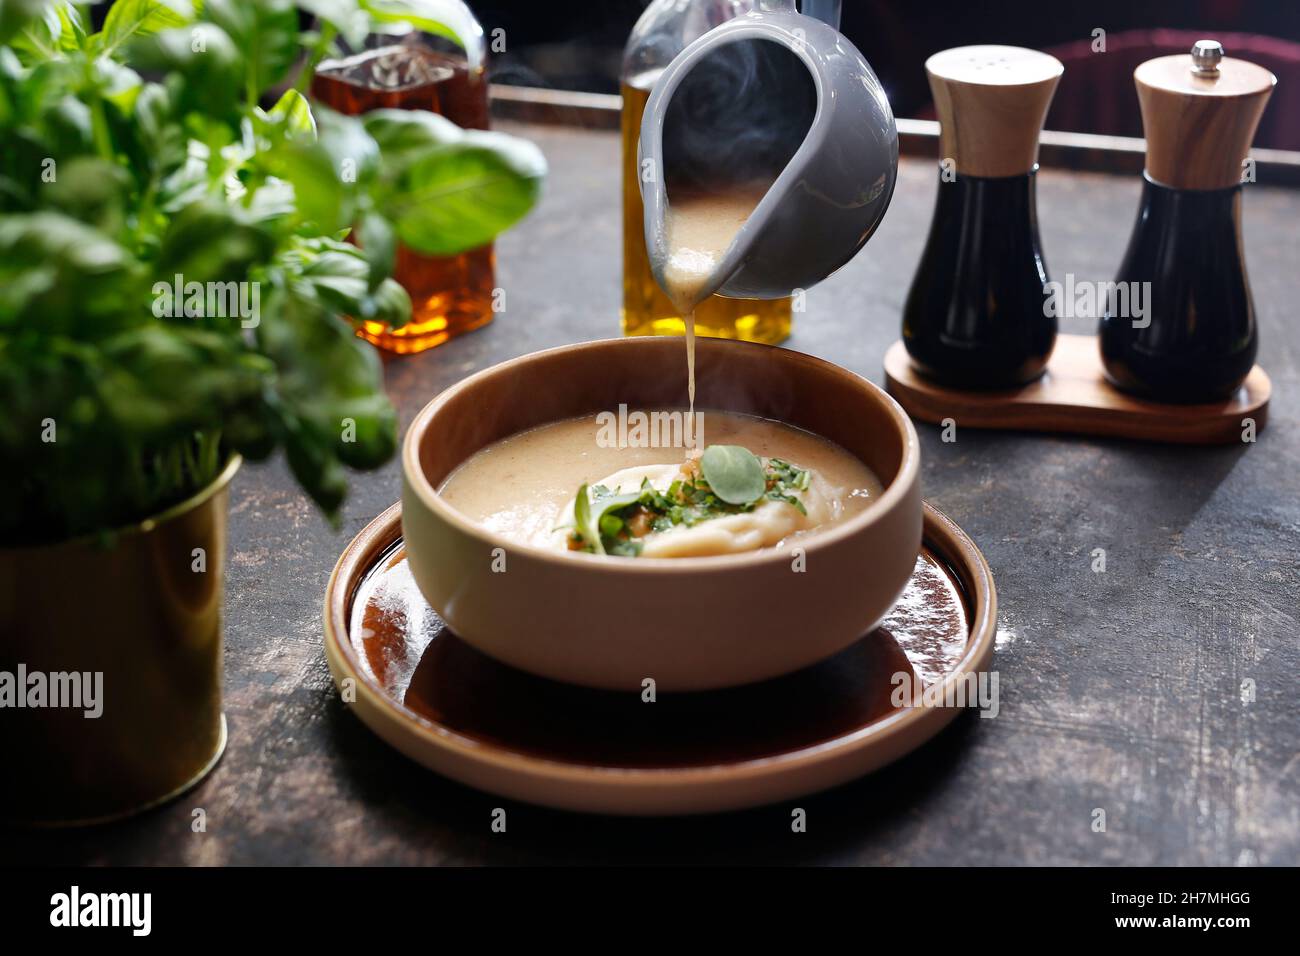 Mushroom cream soup with dumplings. A warming soup. A tasty dish.Culinary photography. Suggestion to serve the dish. Stock Photo